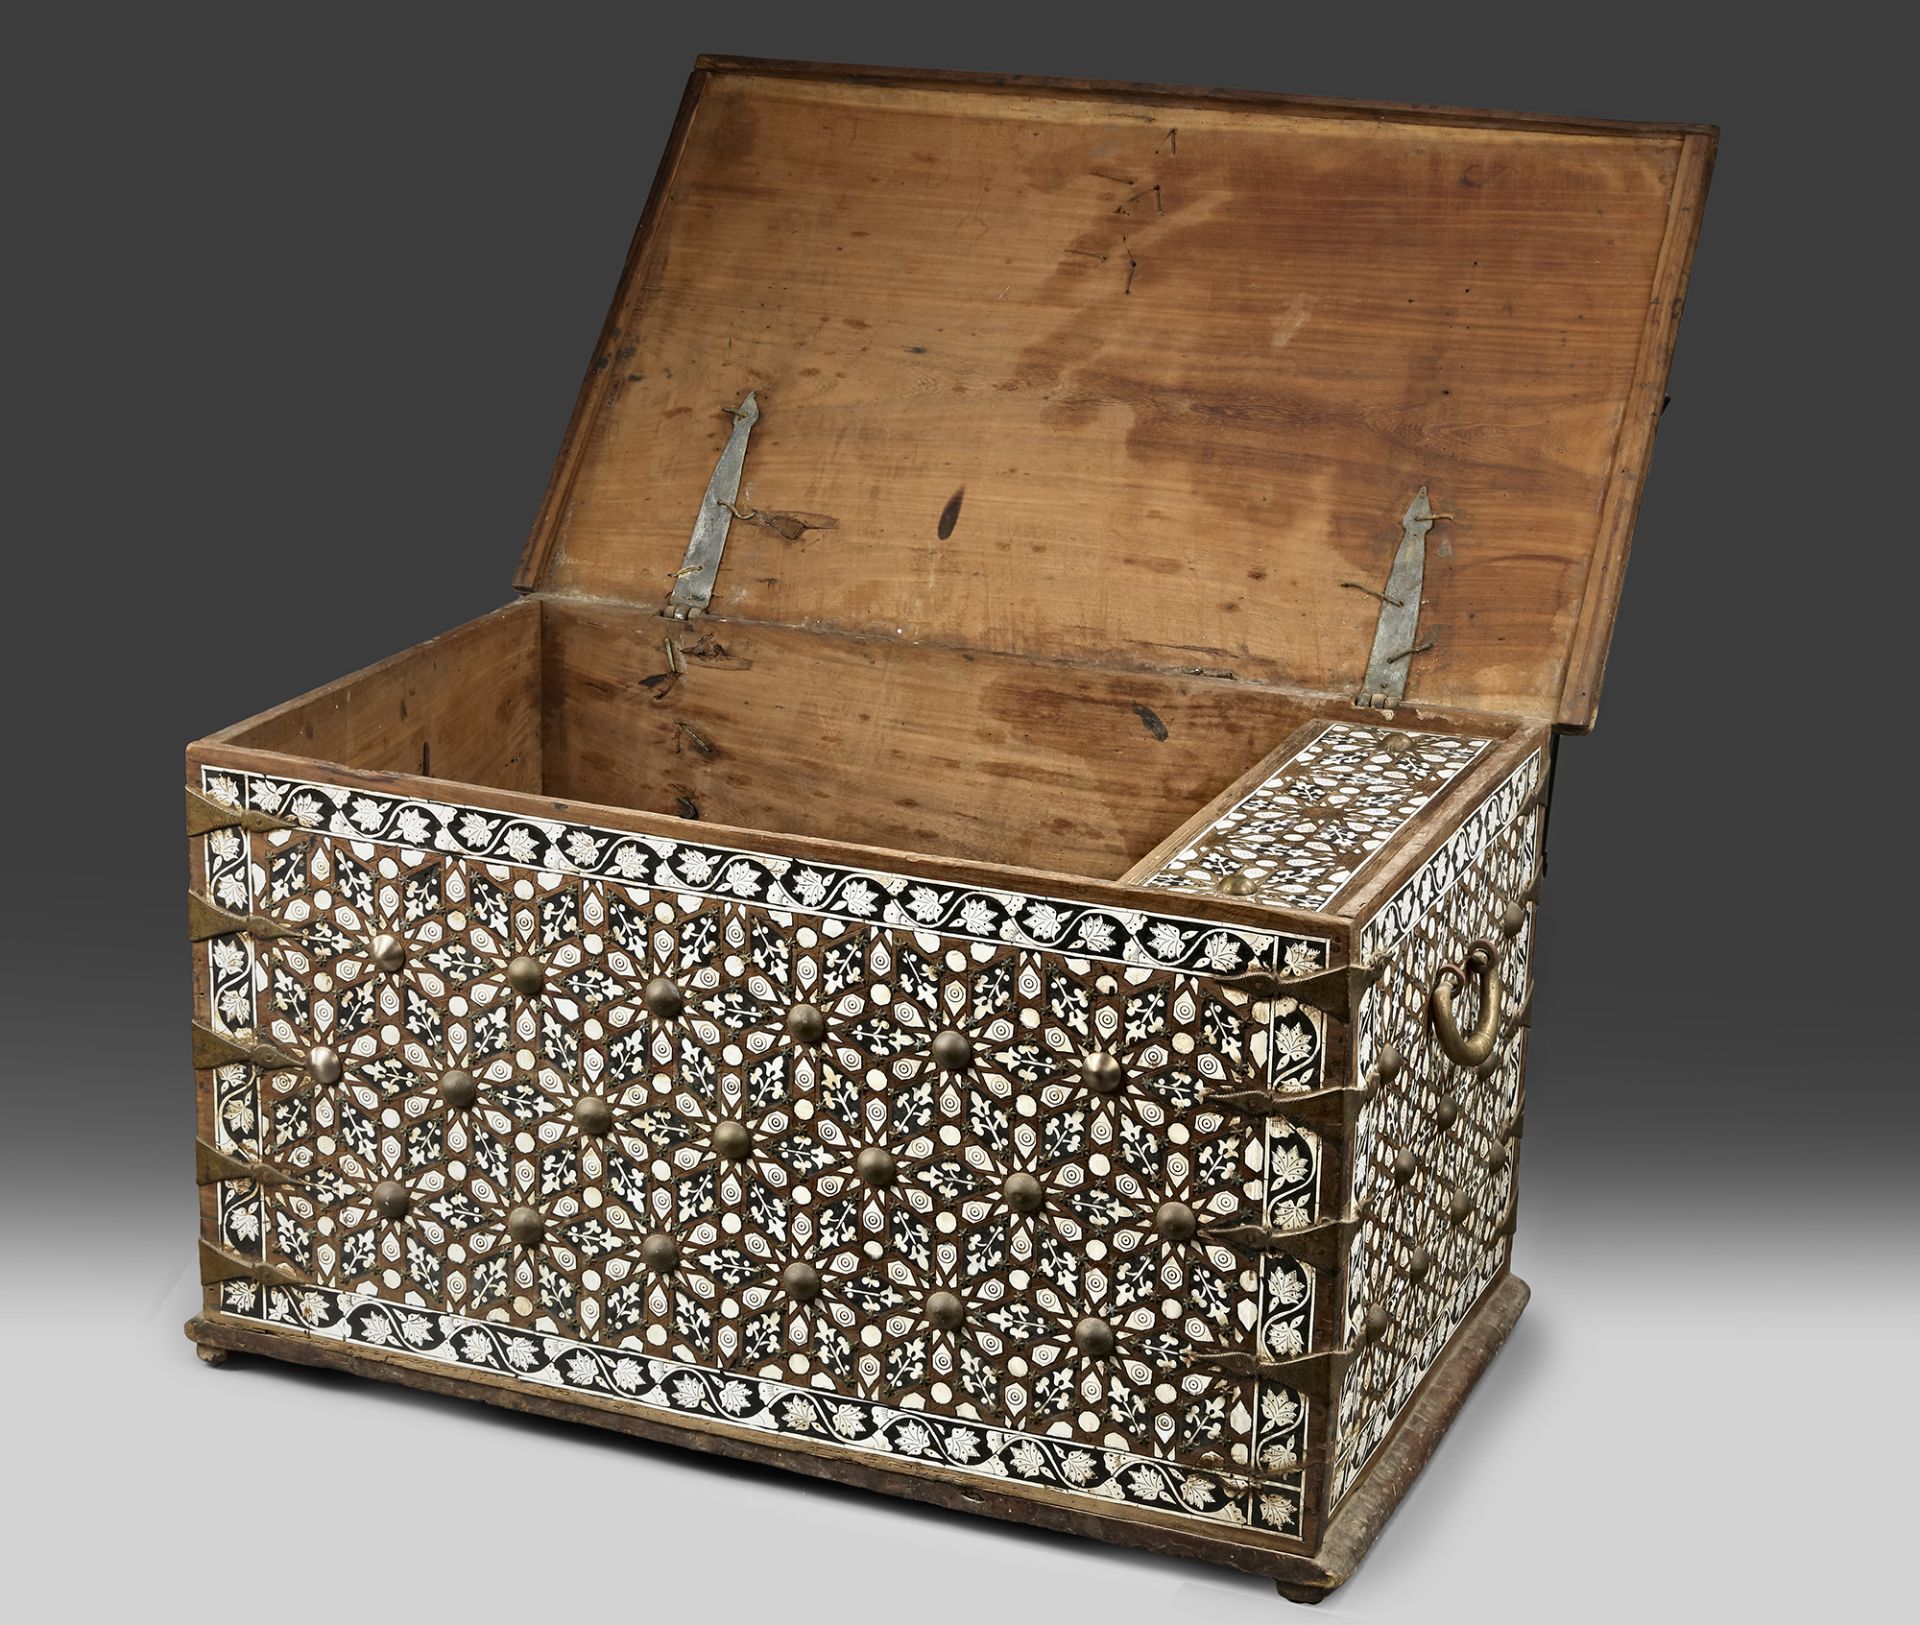 A LARGE OTTOMAN BONE INLAID WOODEN CHEST, SYRIA, LATE 19TH-EARLY 20TH CENTURY - Image 2 of 5